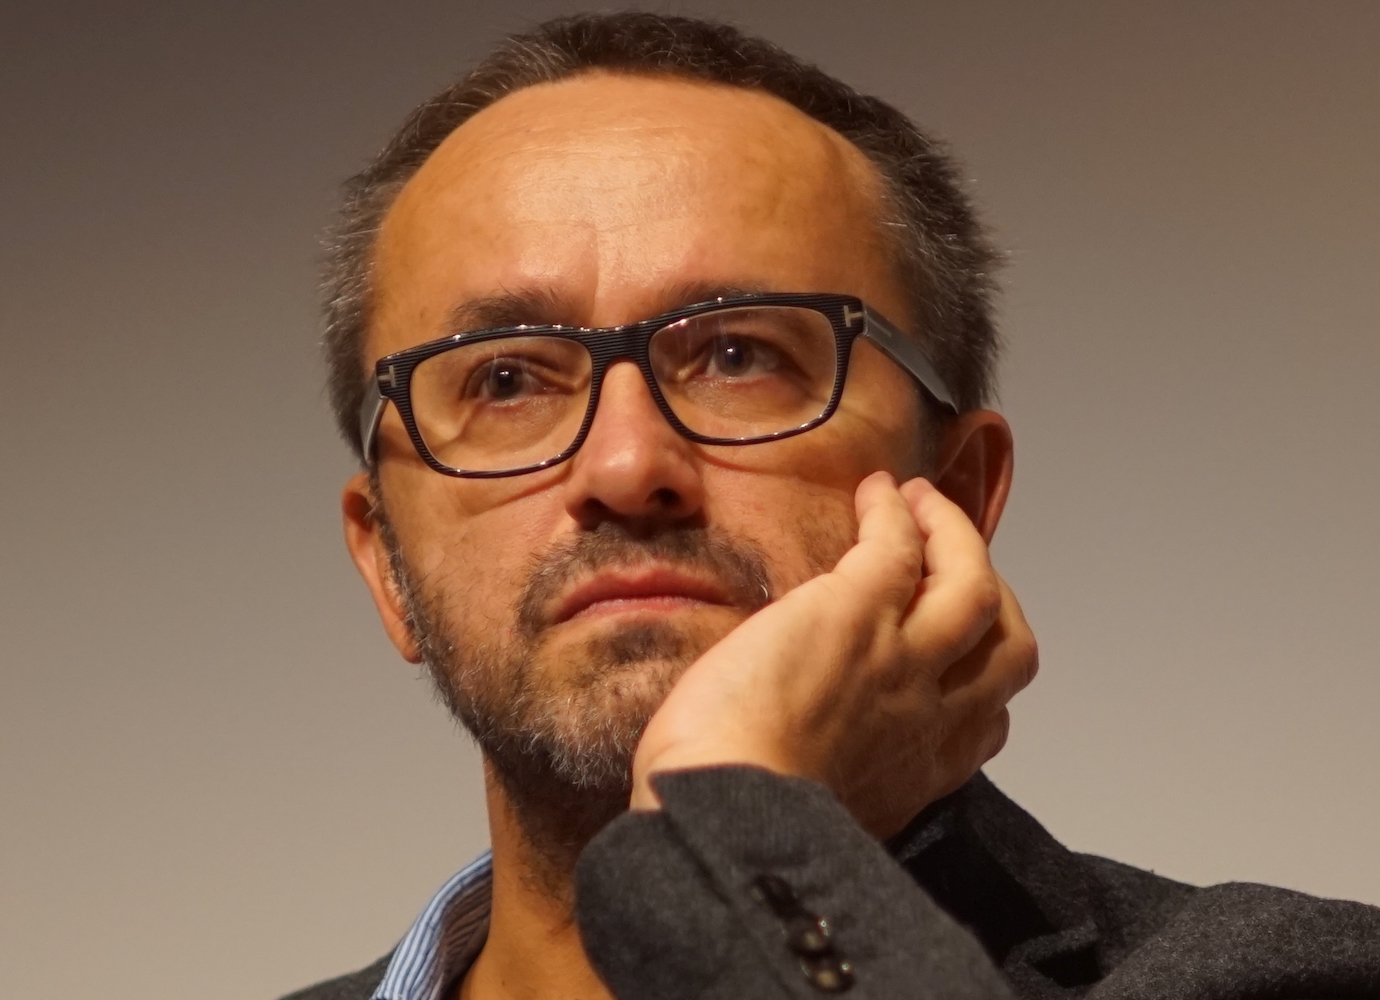 Russian director Andrei Zvyagintsev gives speech in support of Navalny in Novosibirsk